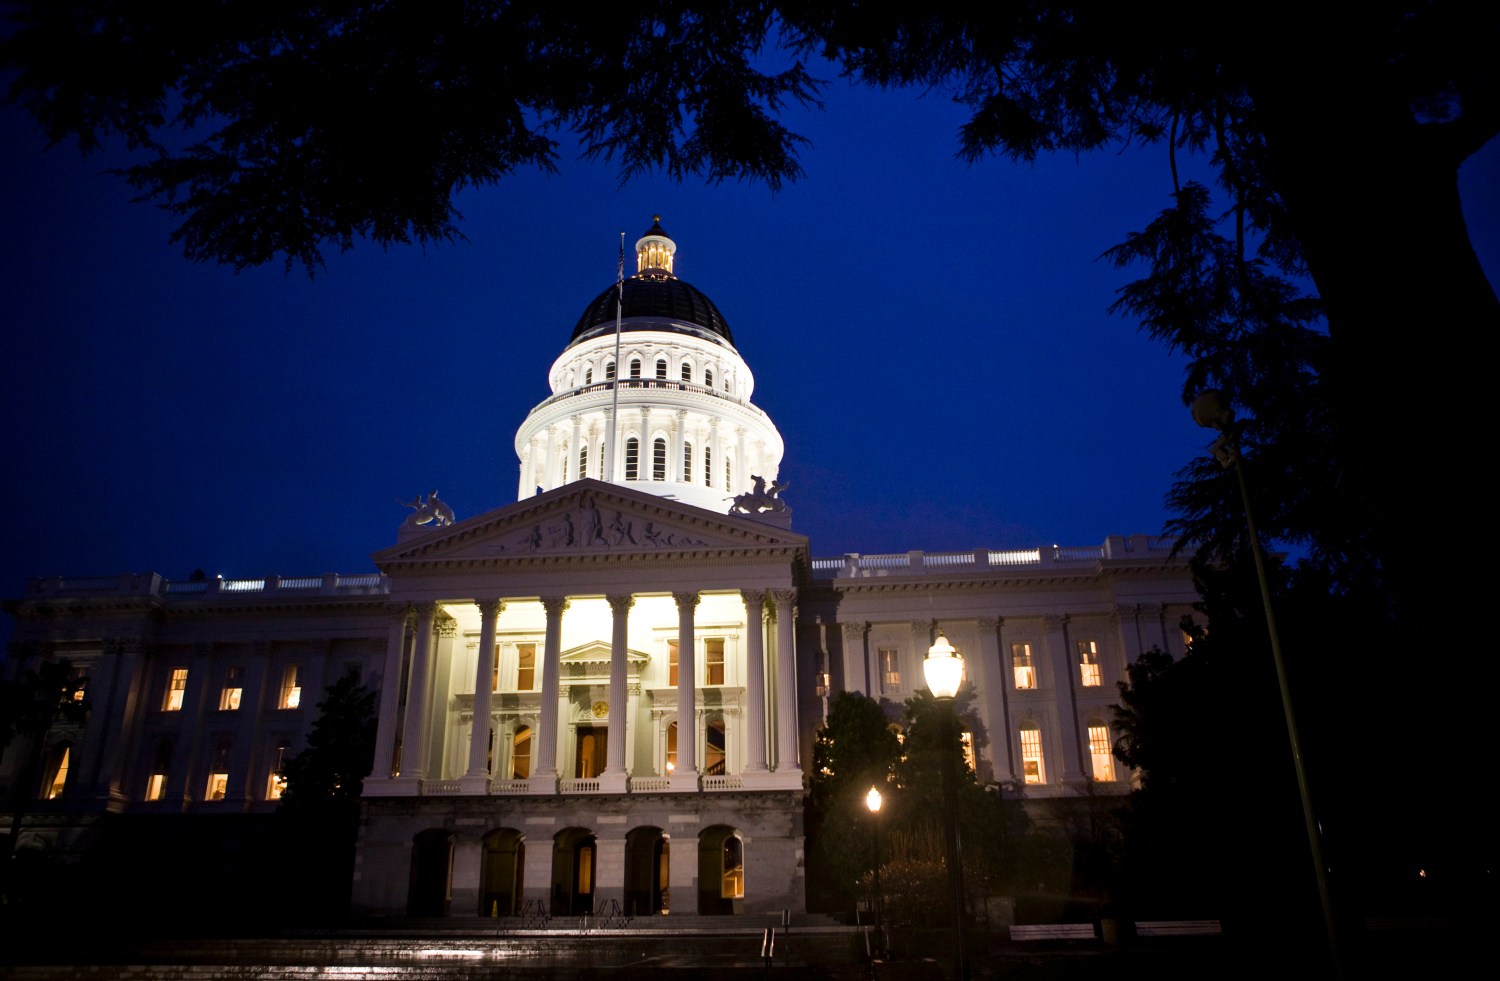 The exterior shot of the State Capitol is seen as California legislators work late into the night to pass a $40 billion budget in the building in Sacramento, California February 17, 2009. As California lawmakers resumed their push on Tuesday to close a state budget shortfall of more than $40 billion, state officials began informing some 20,000 state employees they could lose their jobs if the legislature fails to pass a budget plan.   REUTERS/Max Whittaker (UNITED STATES) - GM1E52I0UL901